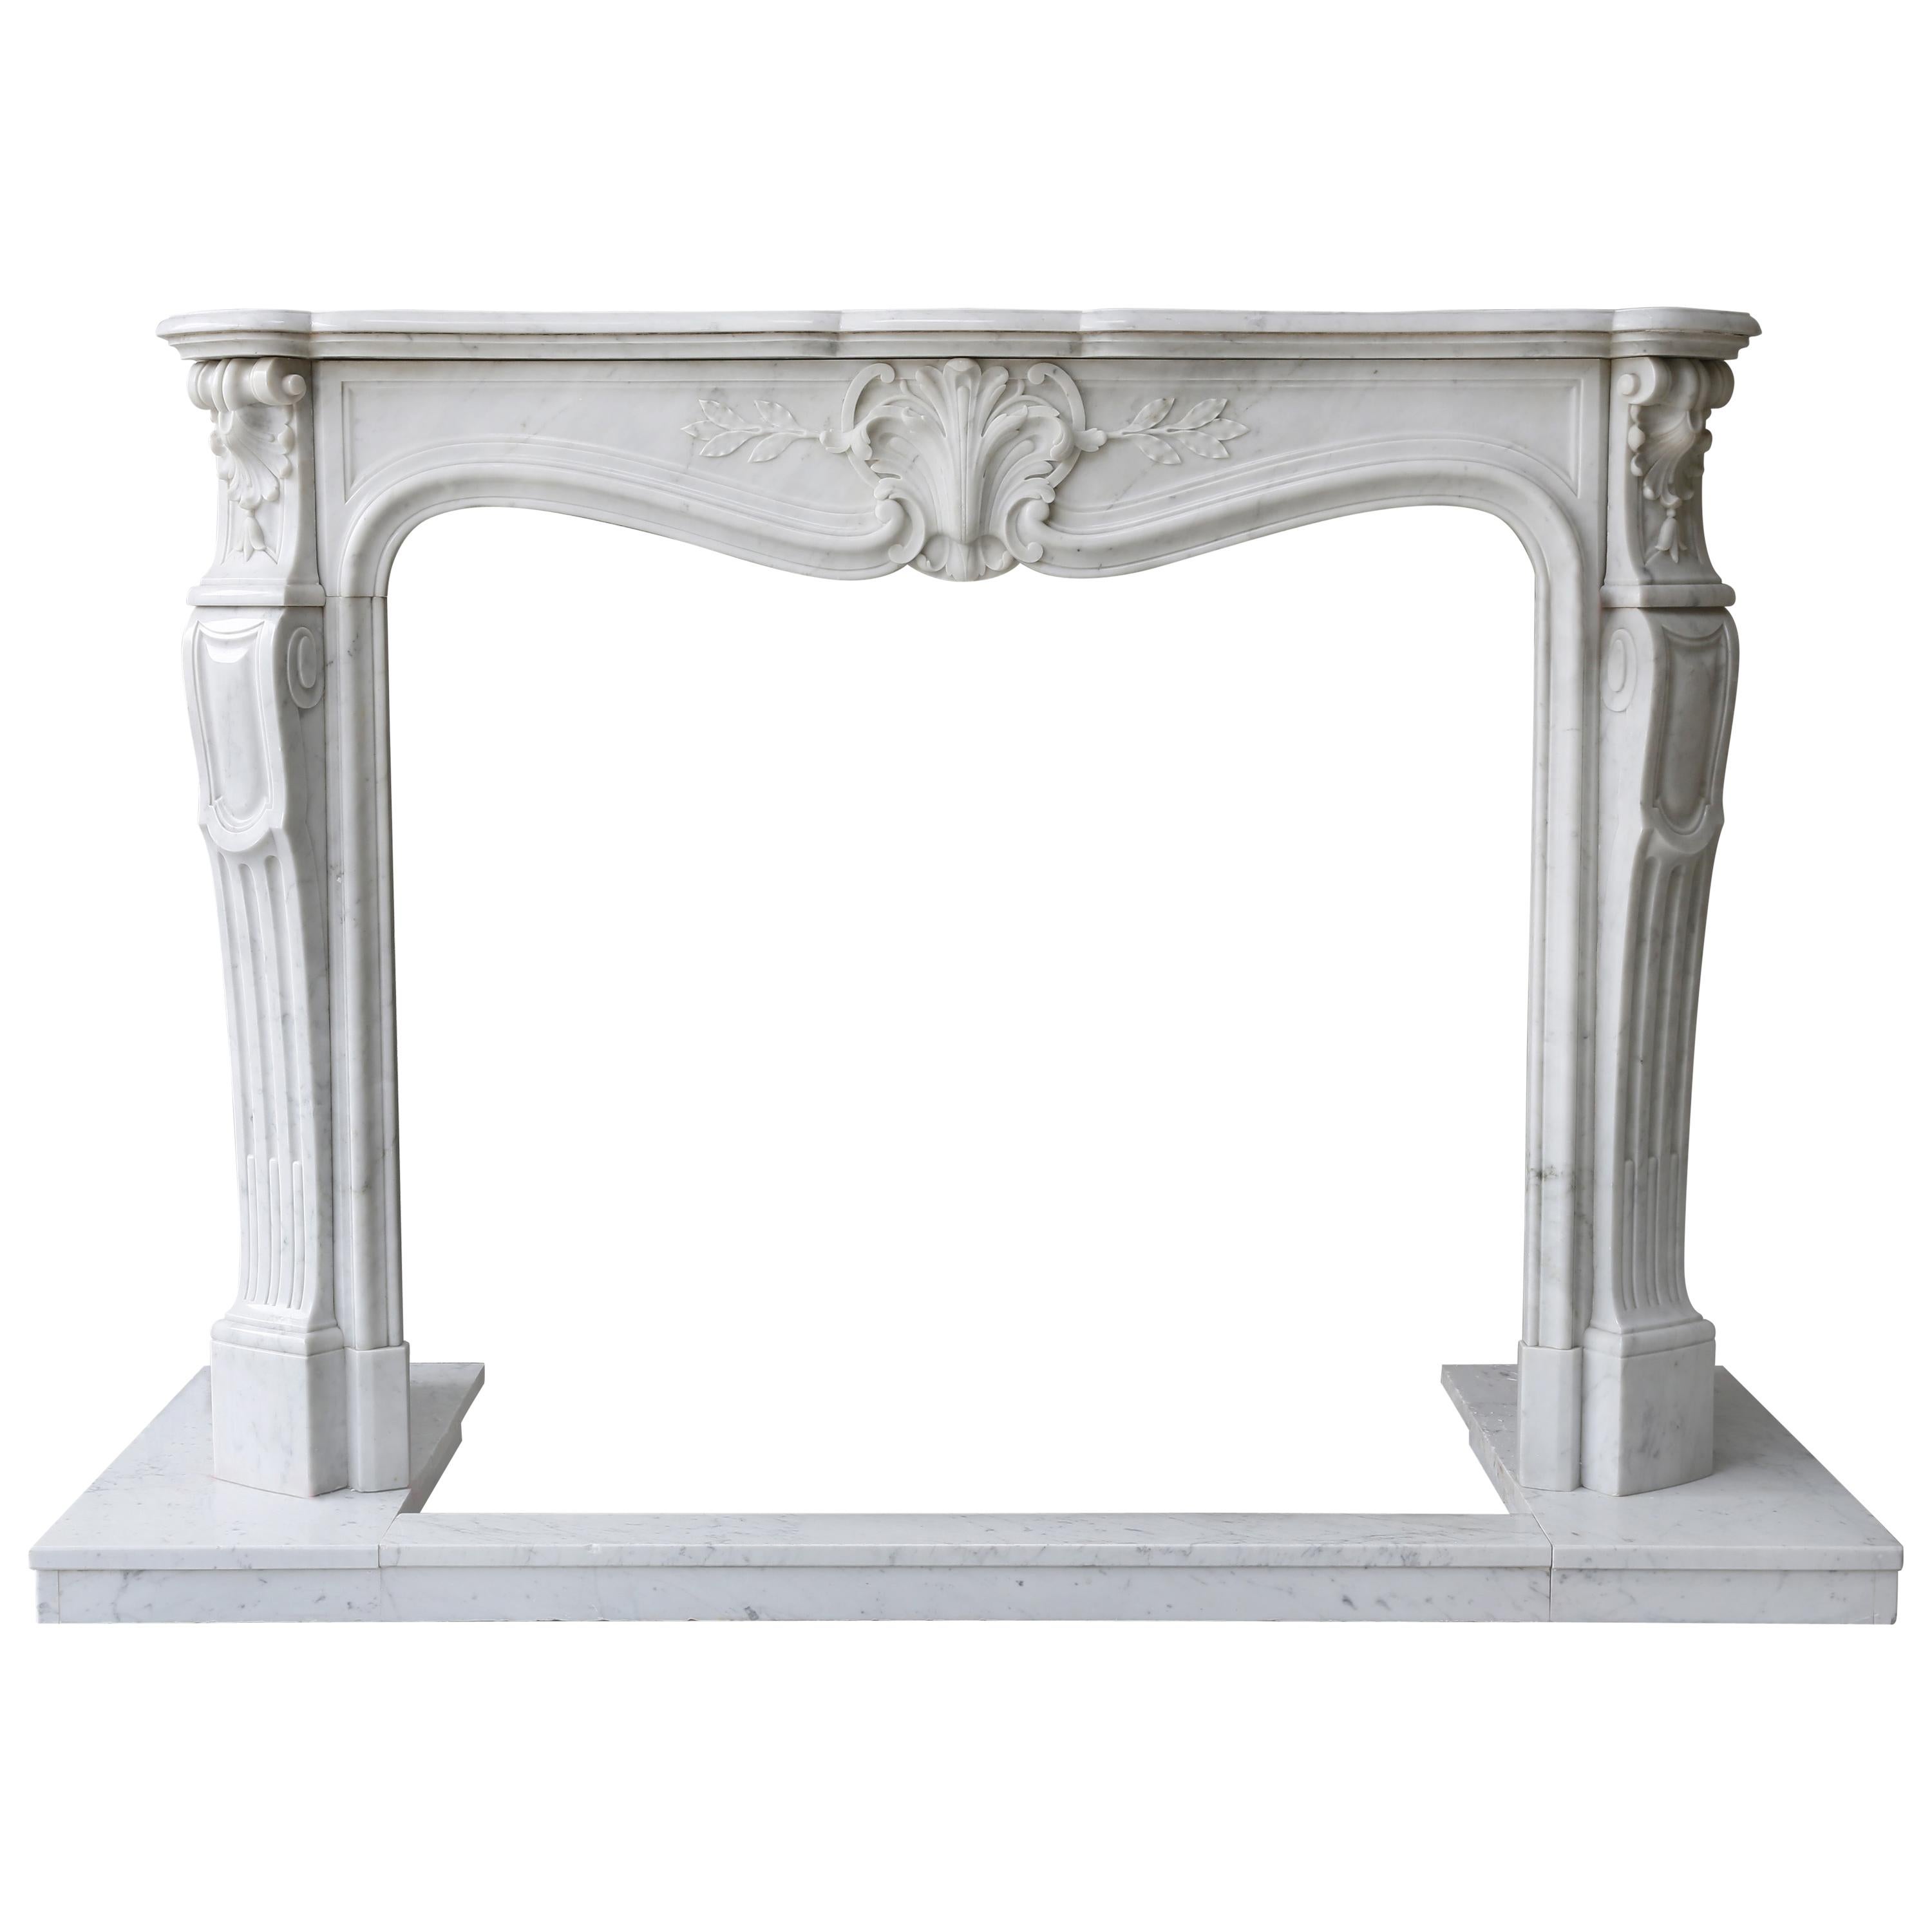 Mantel of White Carrara Marble in Style of Louis XV from the 19th Century For Sale